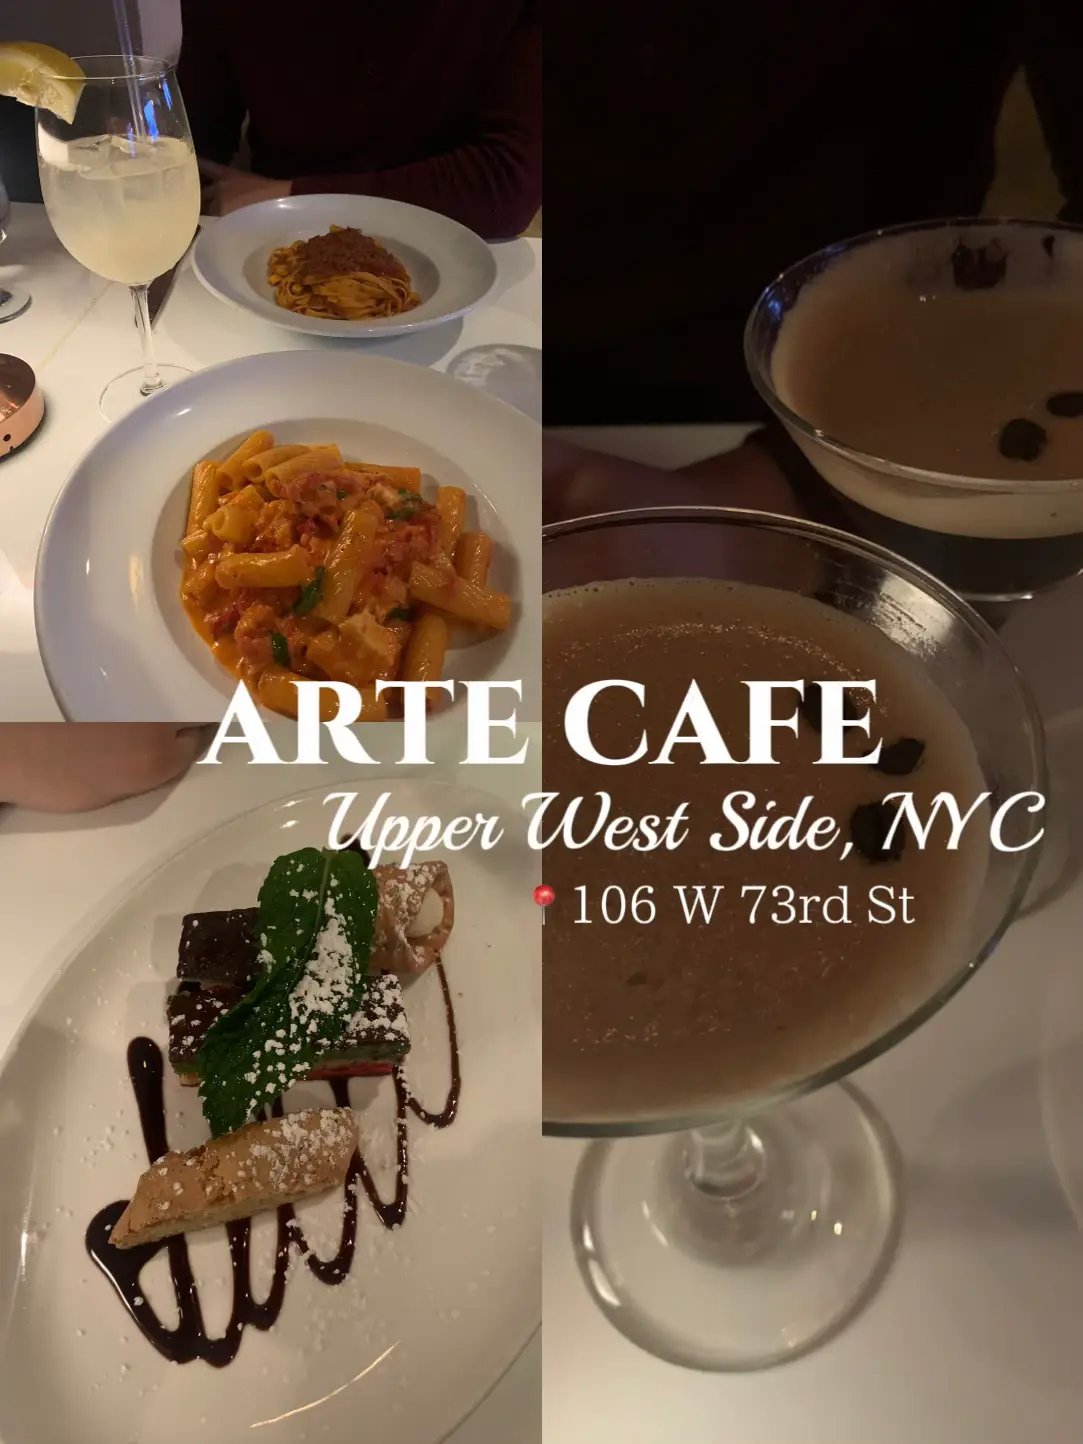 Arte Cafe NYC's images